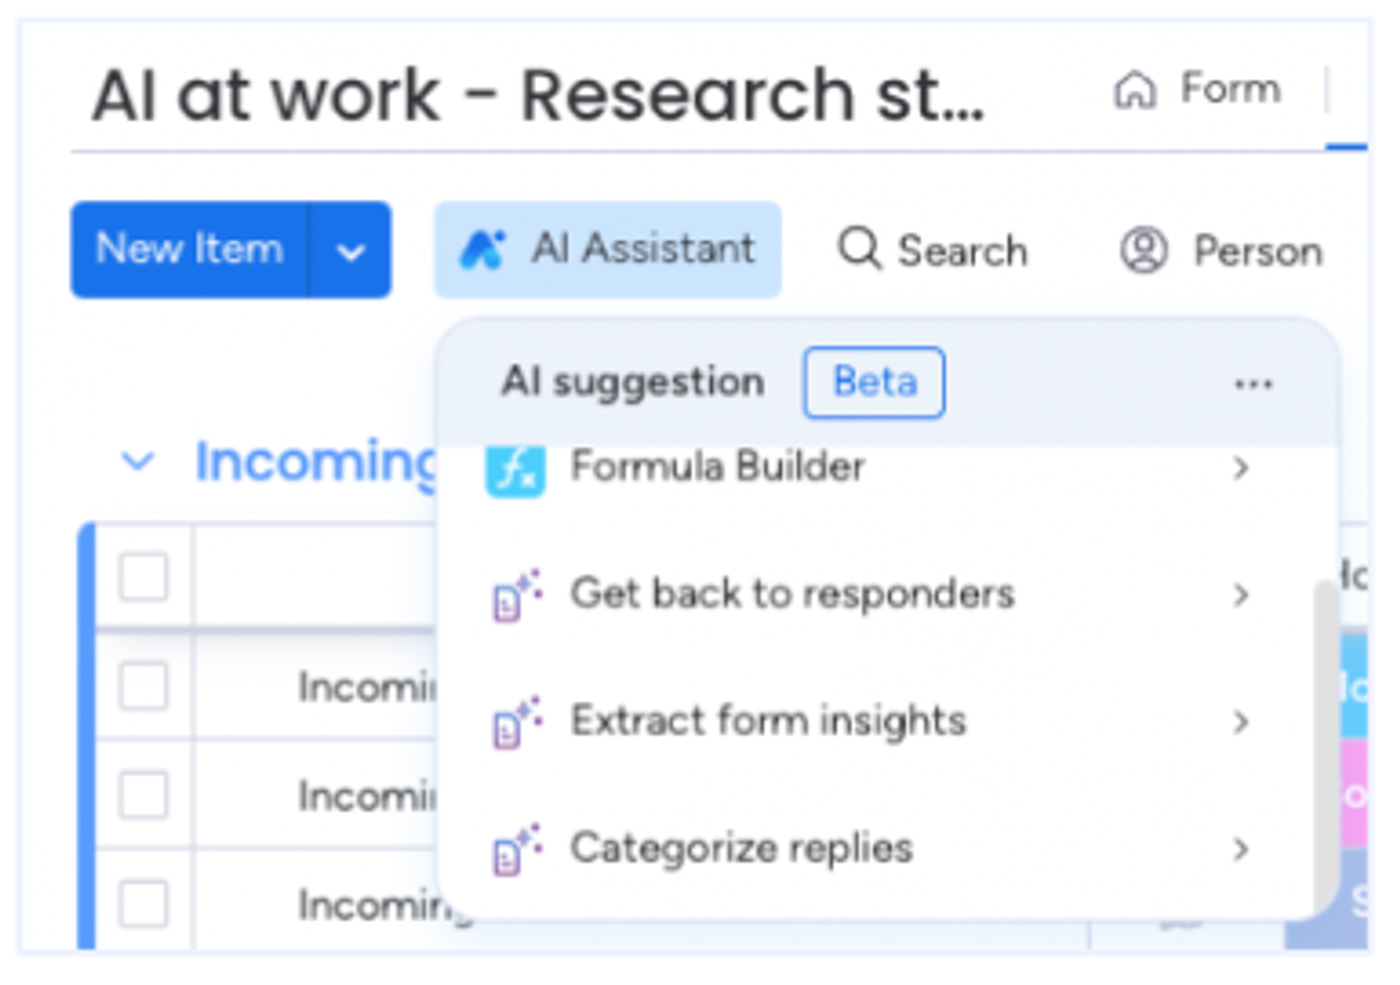 Screenshot showing how to access the AI Assistant in monday.com.